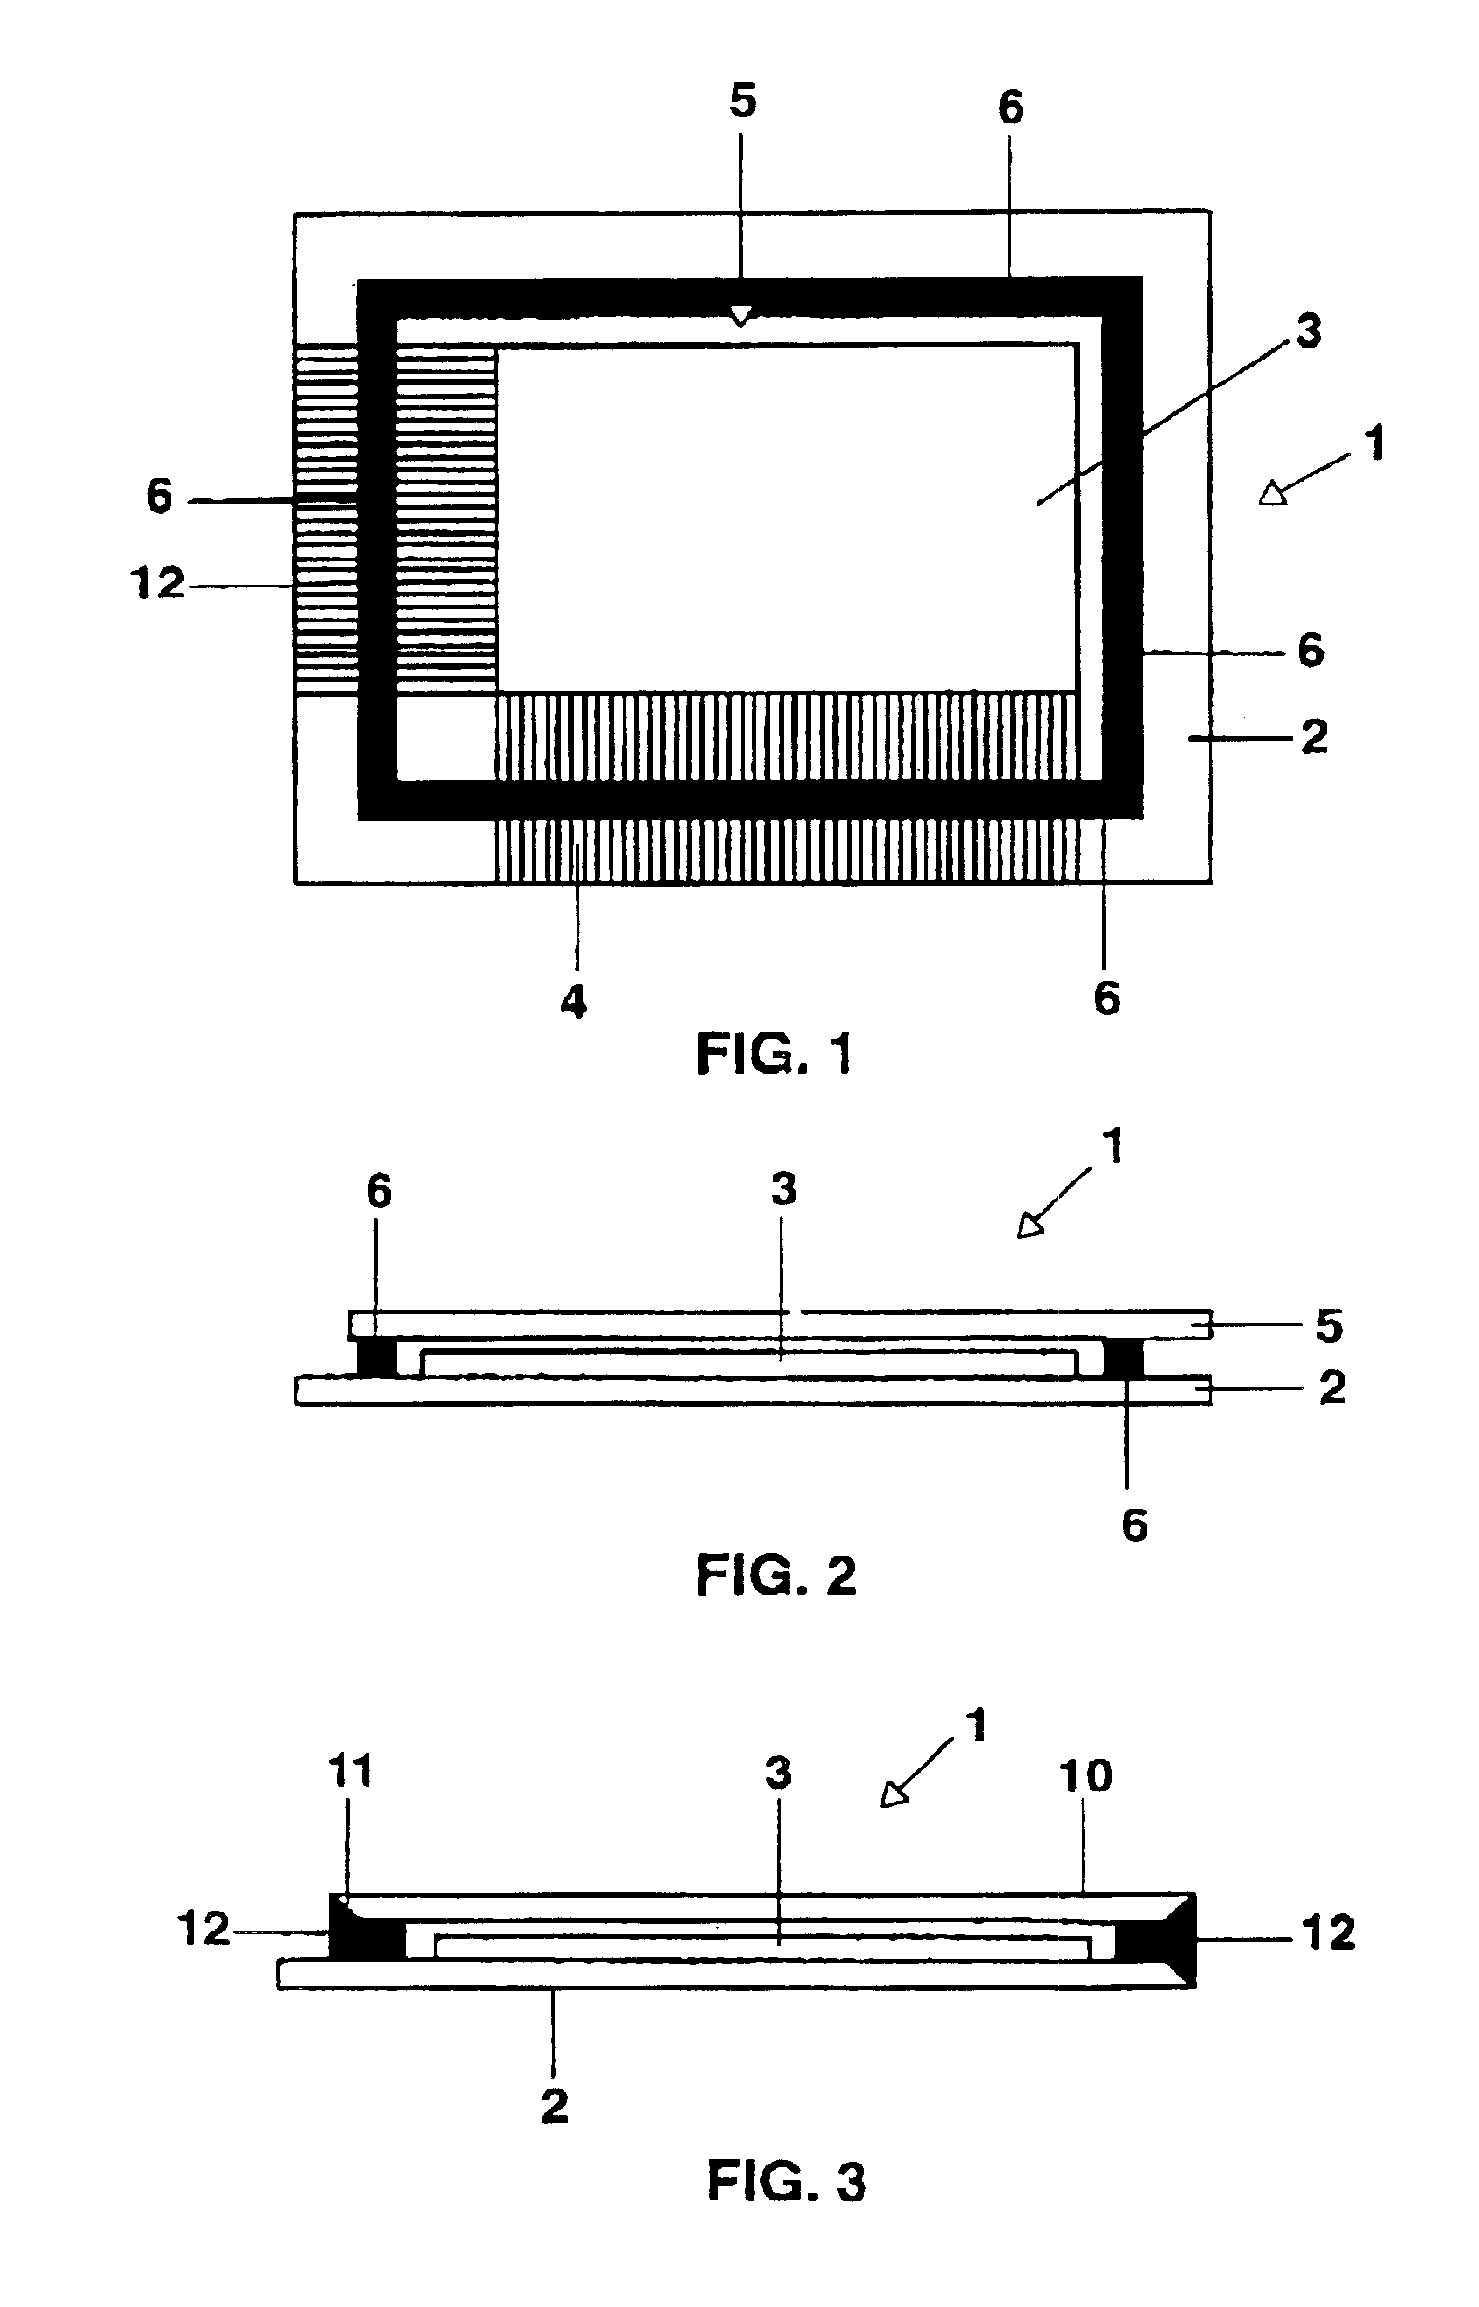 Process for encapsulating a component made of organic semiconductors